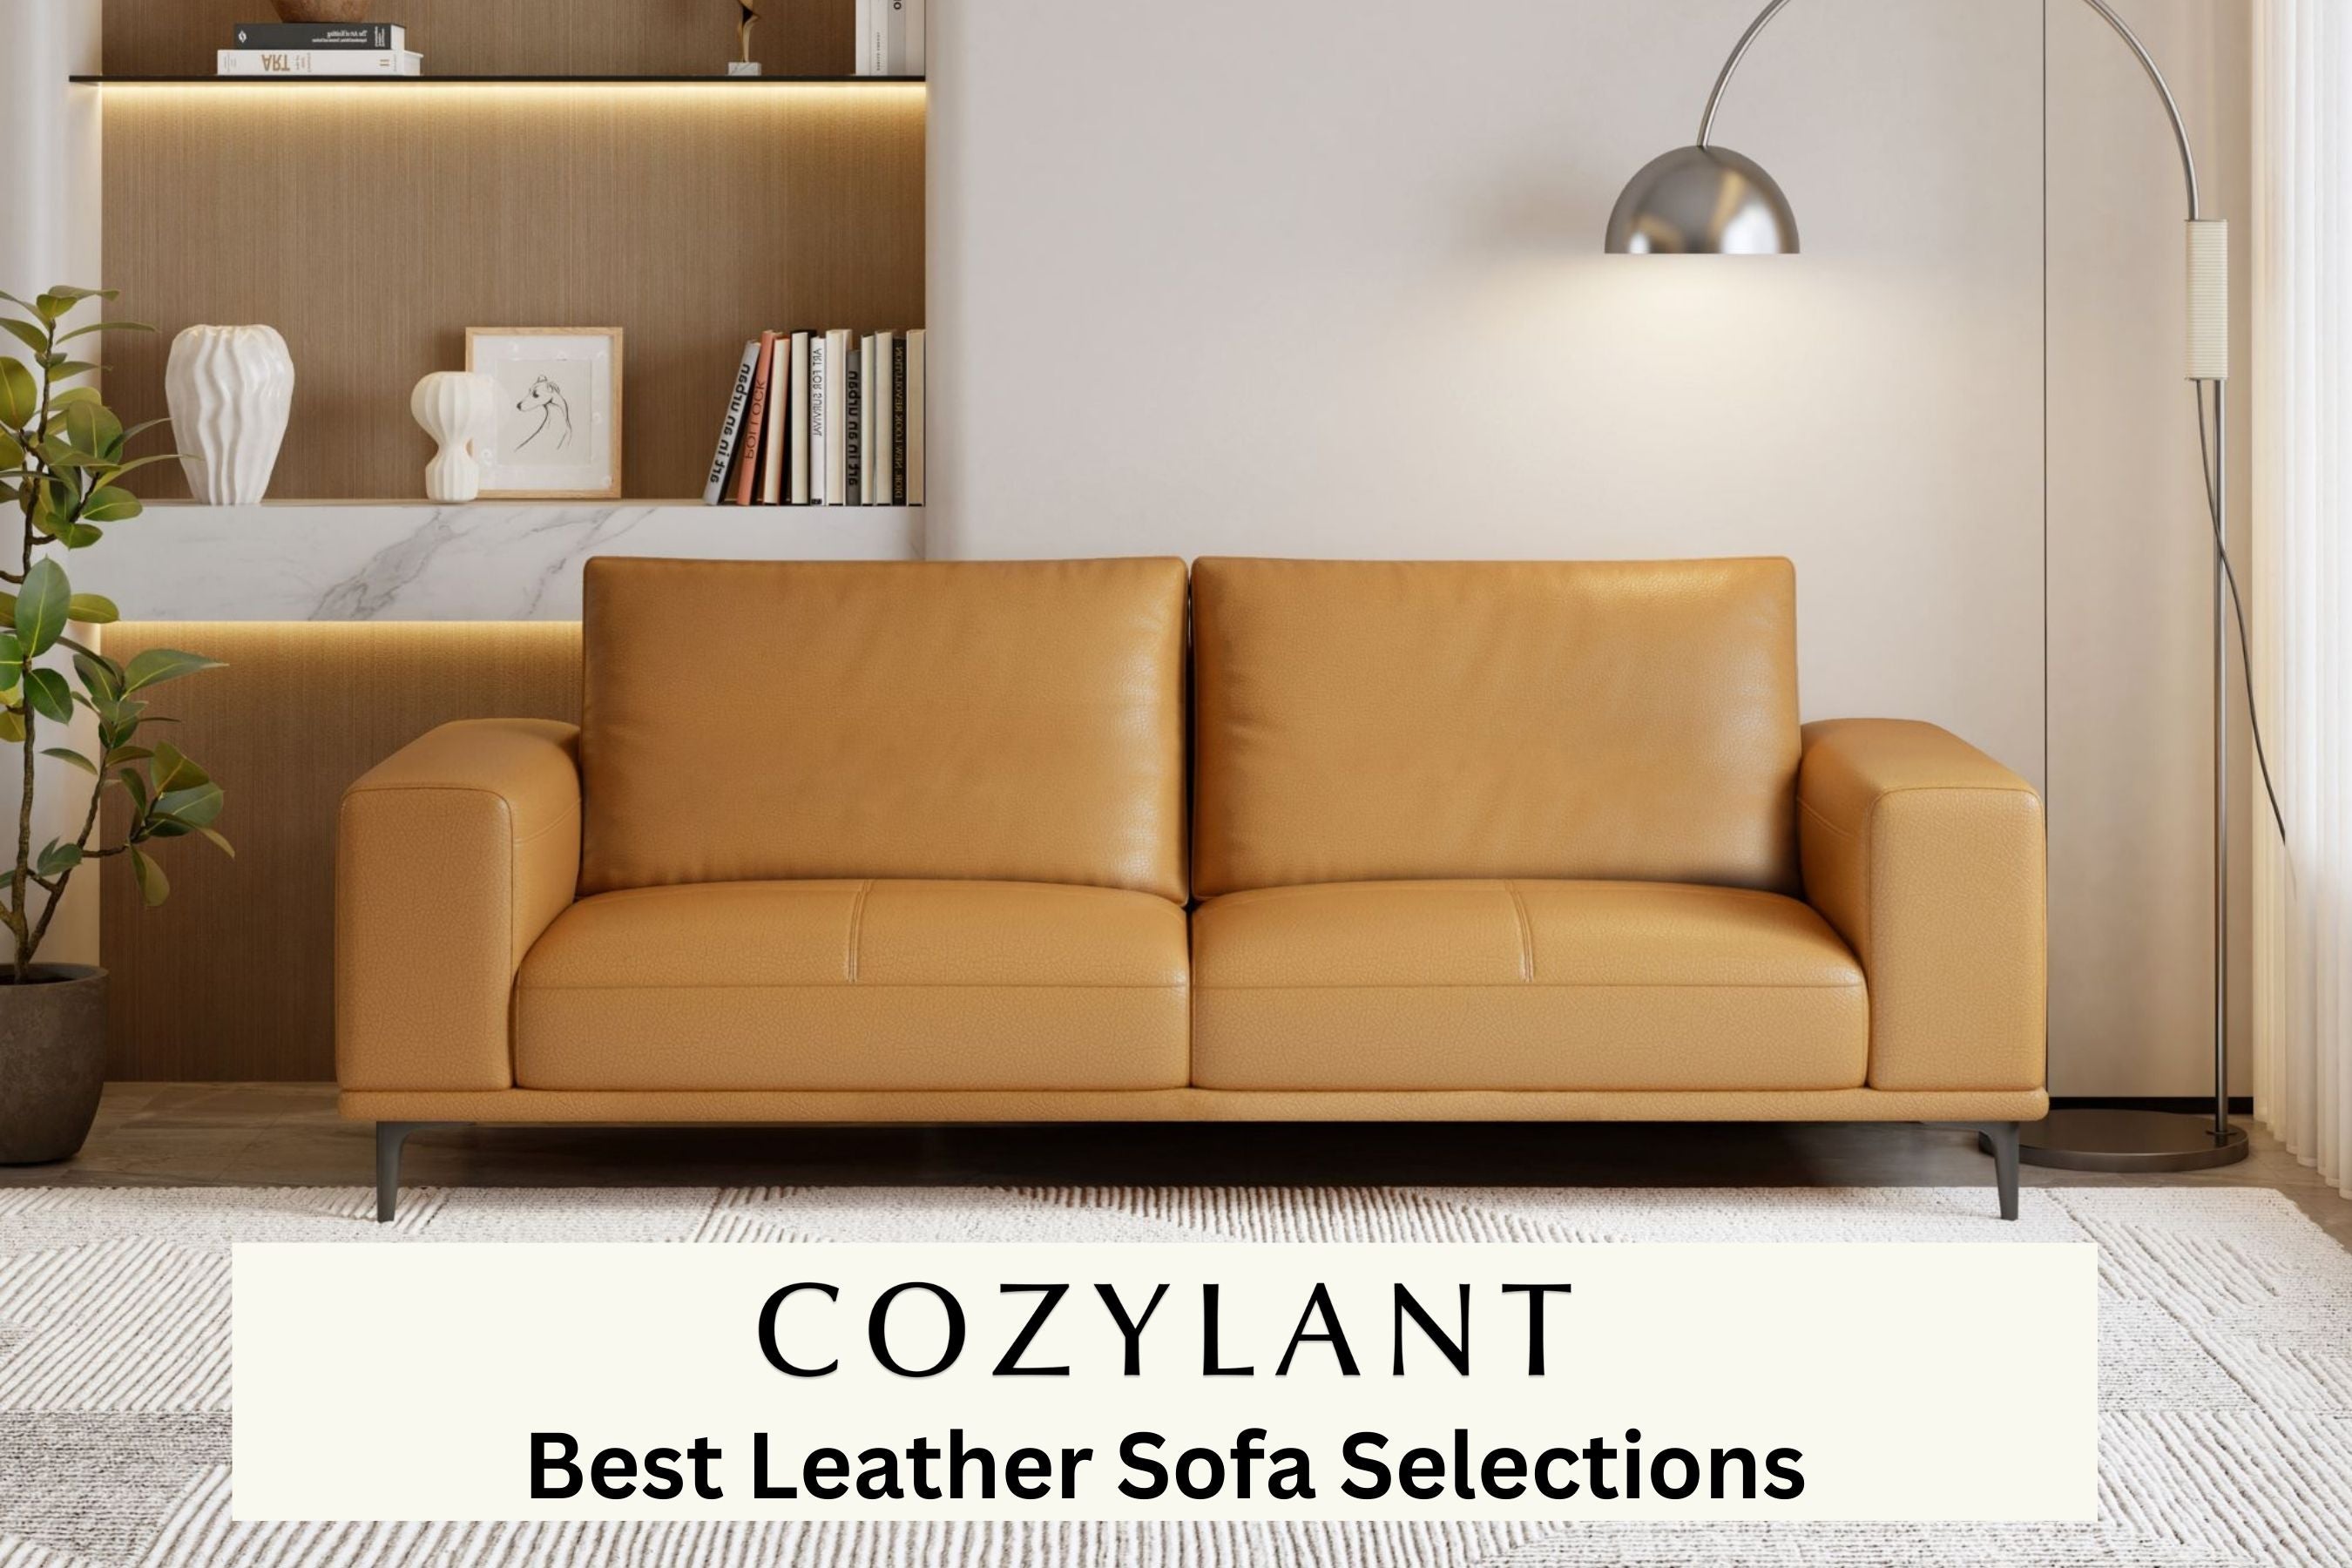 Cozylant S Selection Of Best Leather Sofas